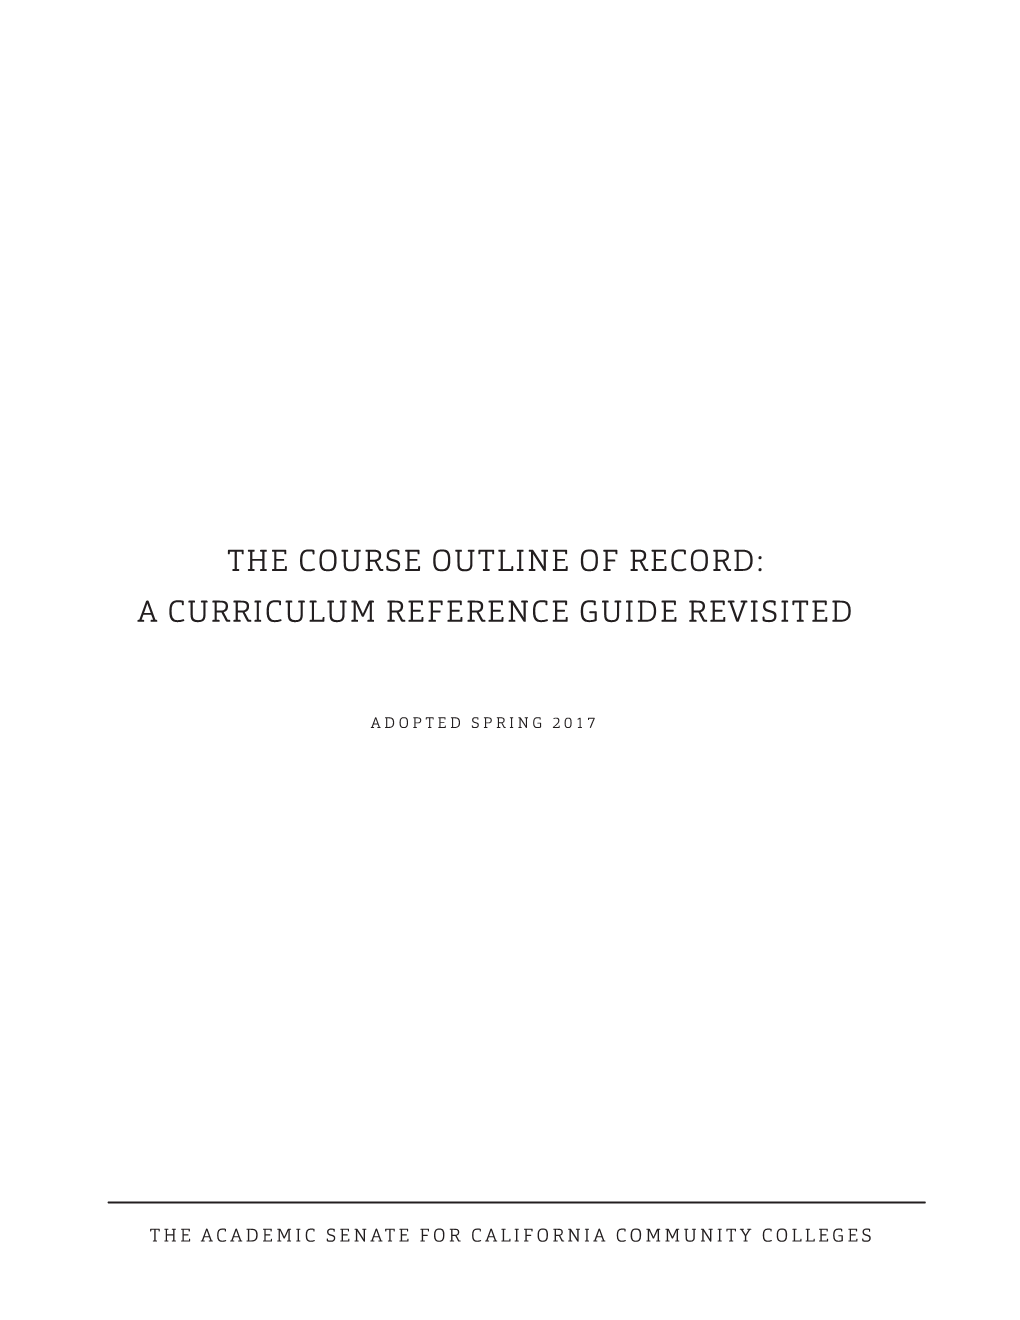 Course Outline of Record: a Curriculum Reference Guide Revisited